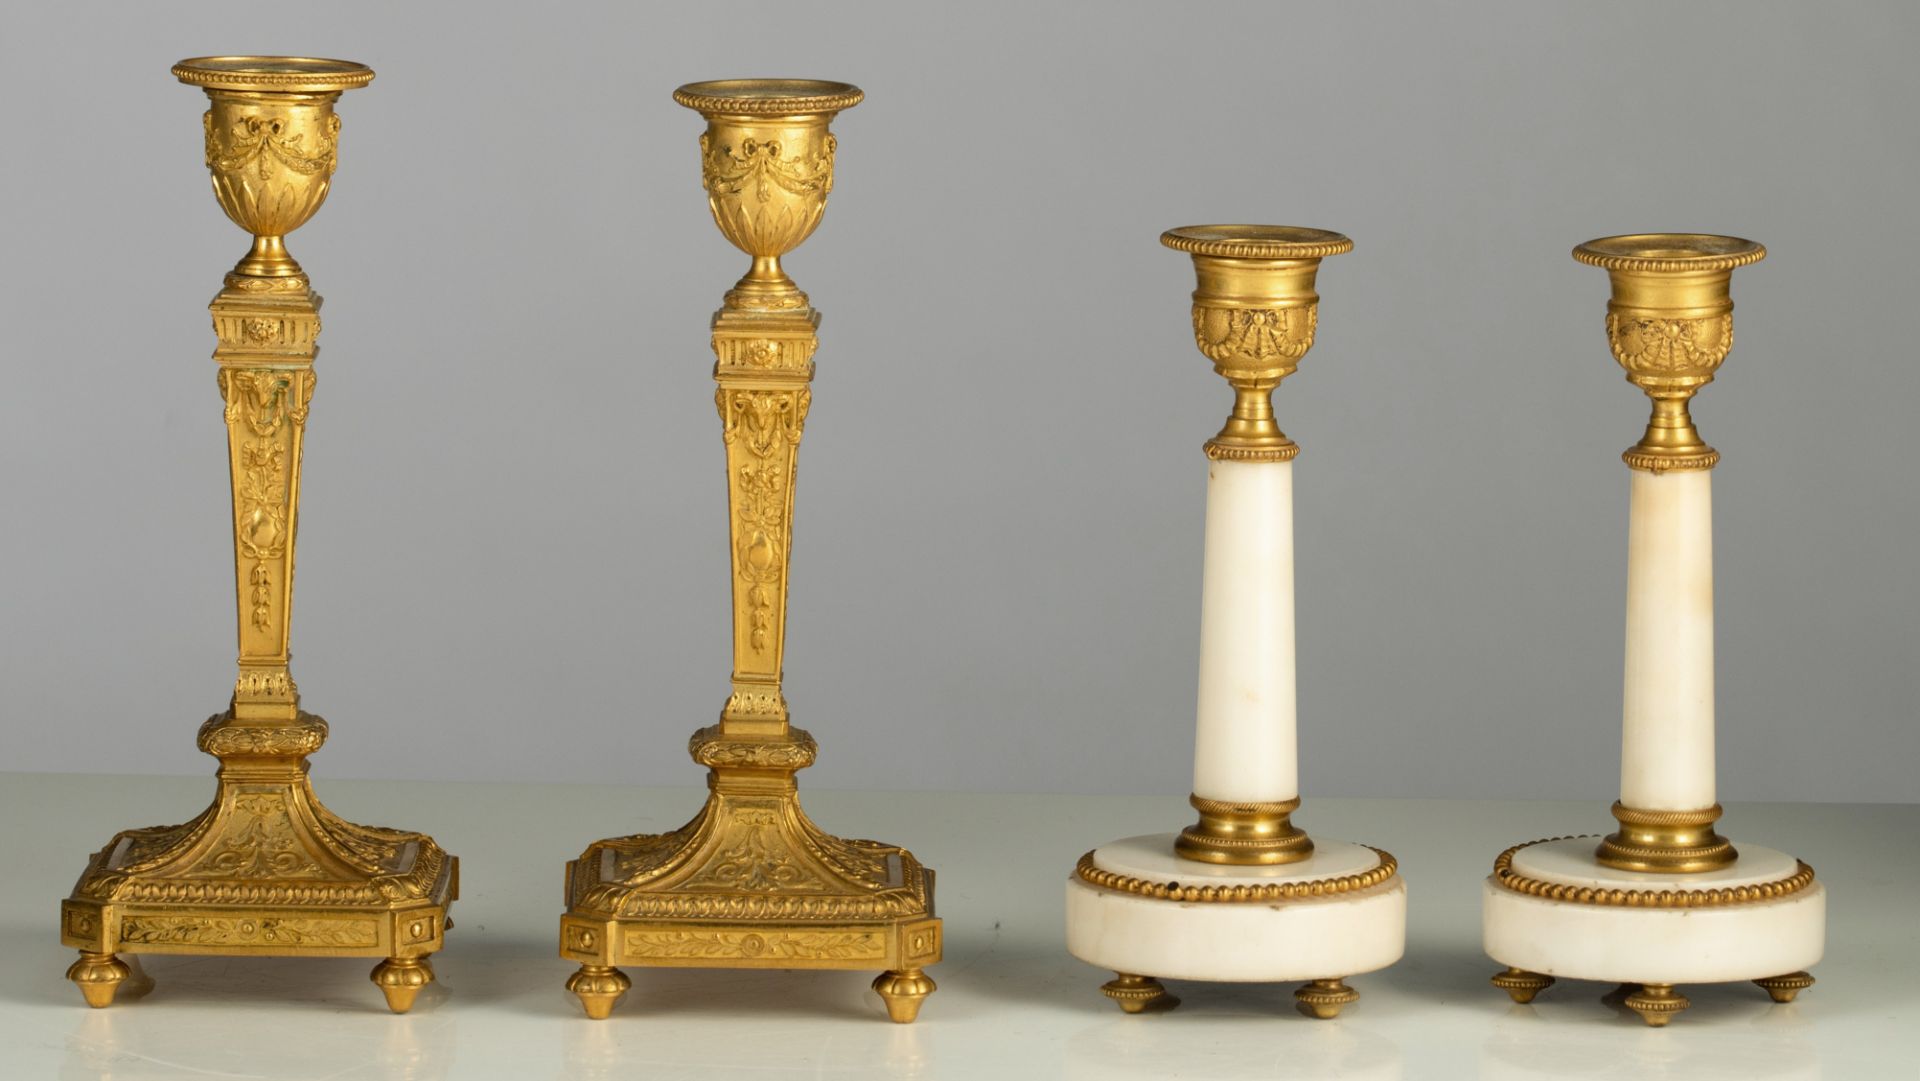 (BIDDING ONLY ON CARLOBONTE.BE) Two pairs of Neoclassical candlesticks, H 17,5 - 21 cm - Image 4 of 8